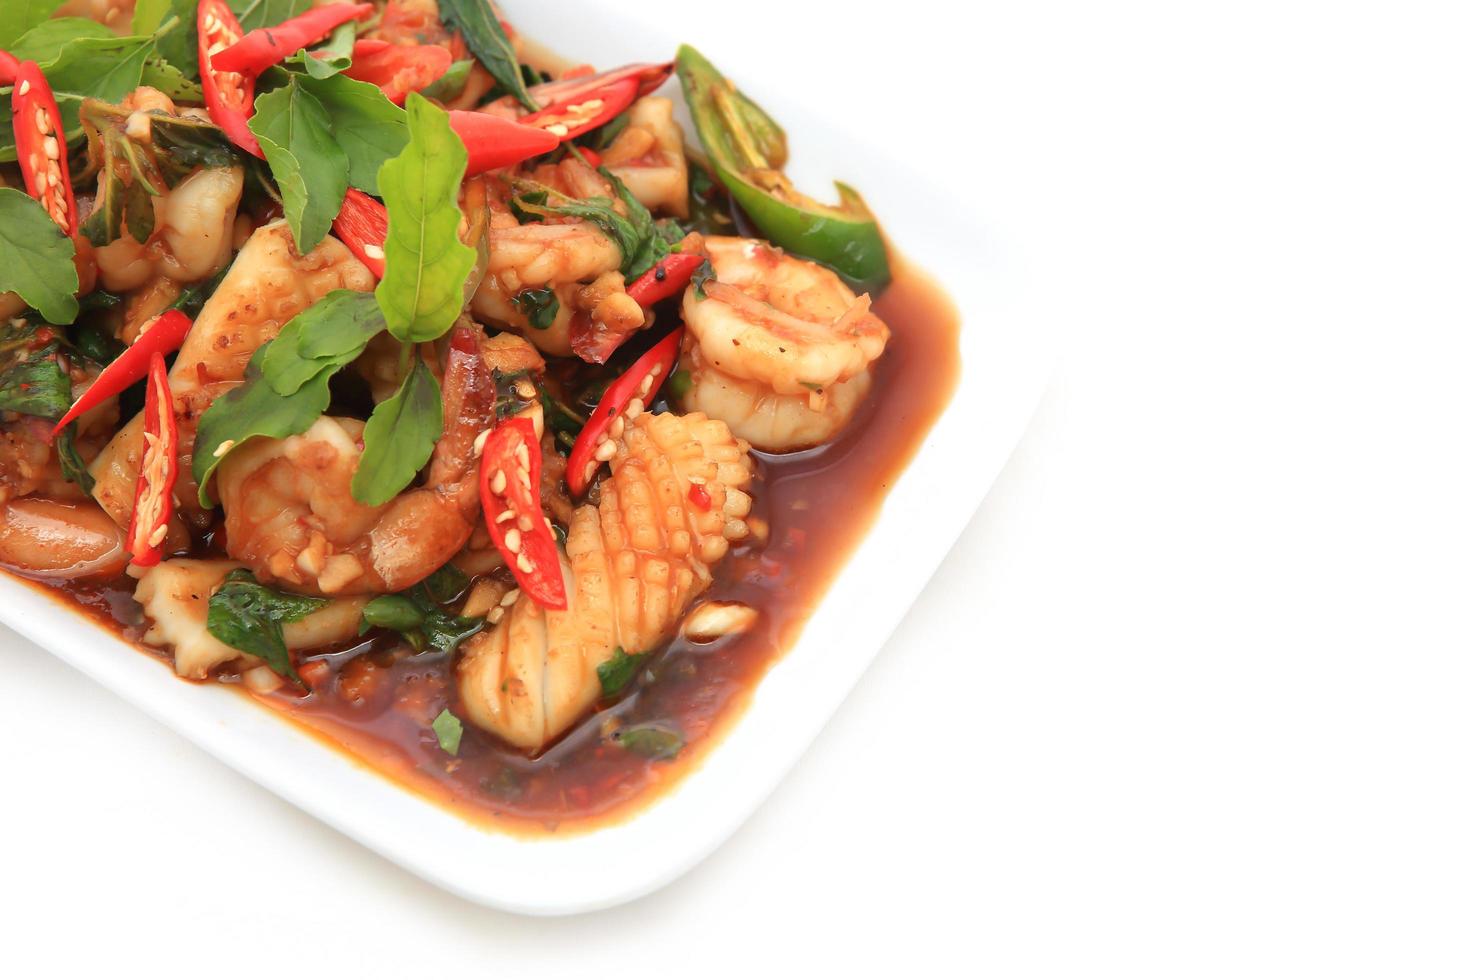 Spicy seafood fried served on white dish photo